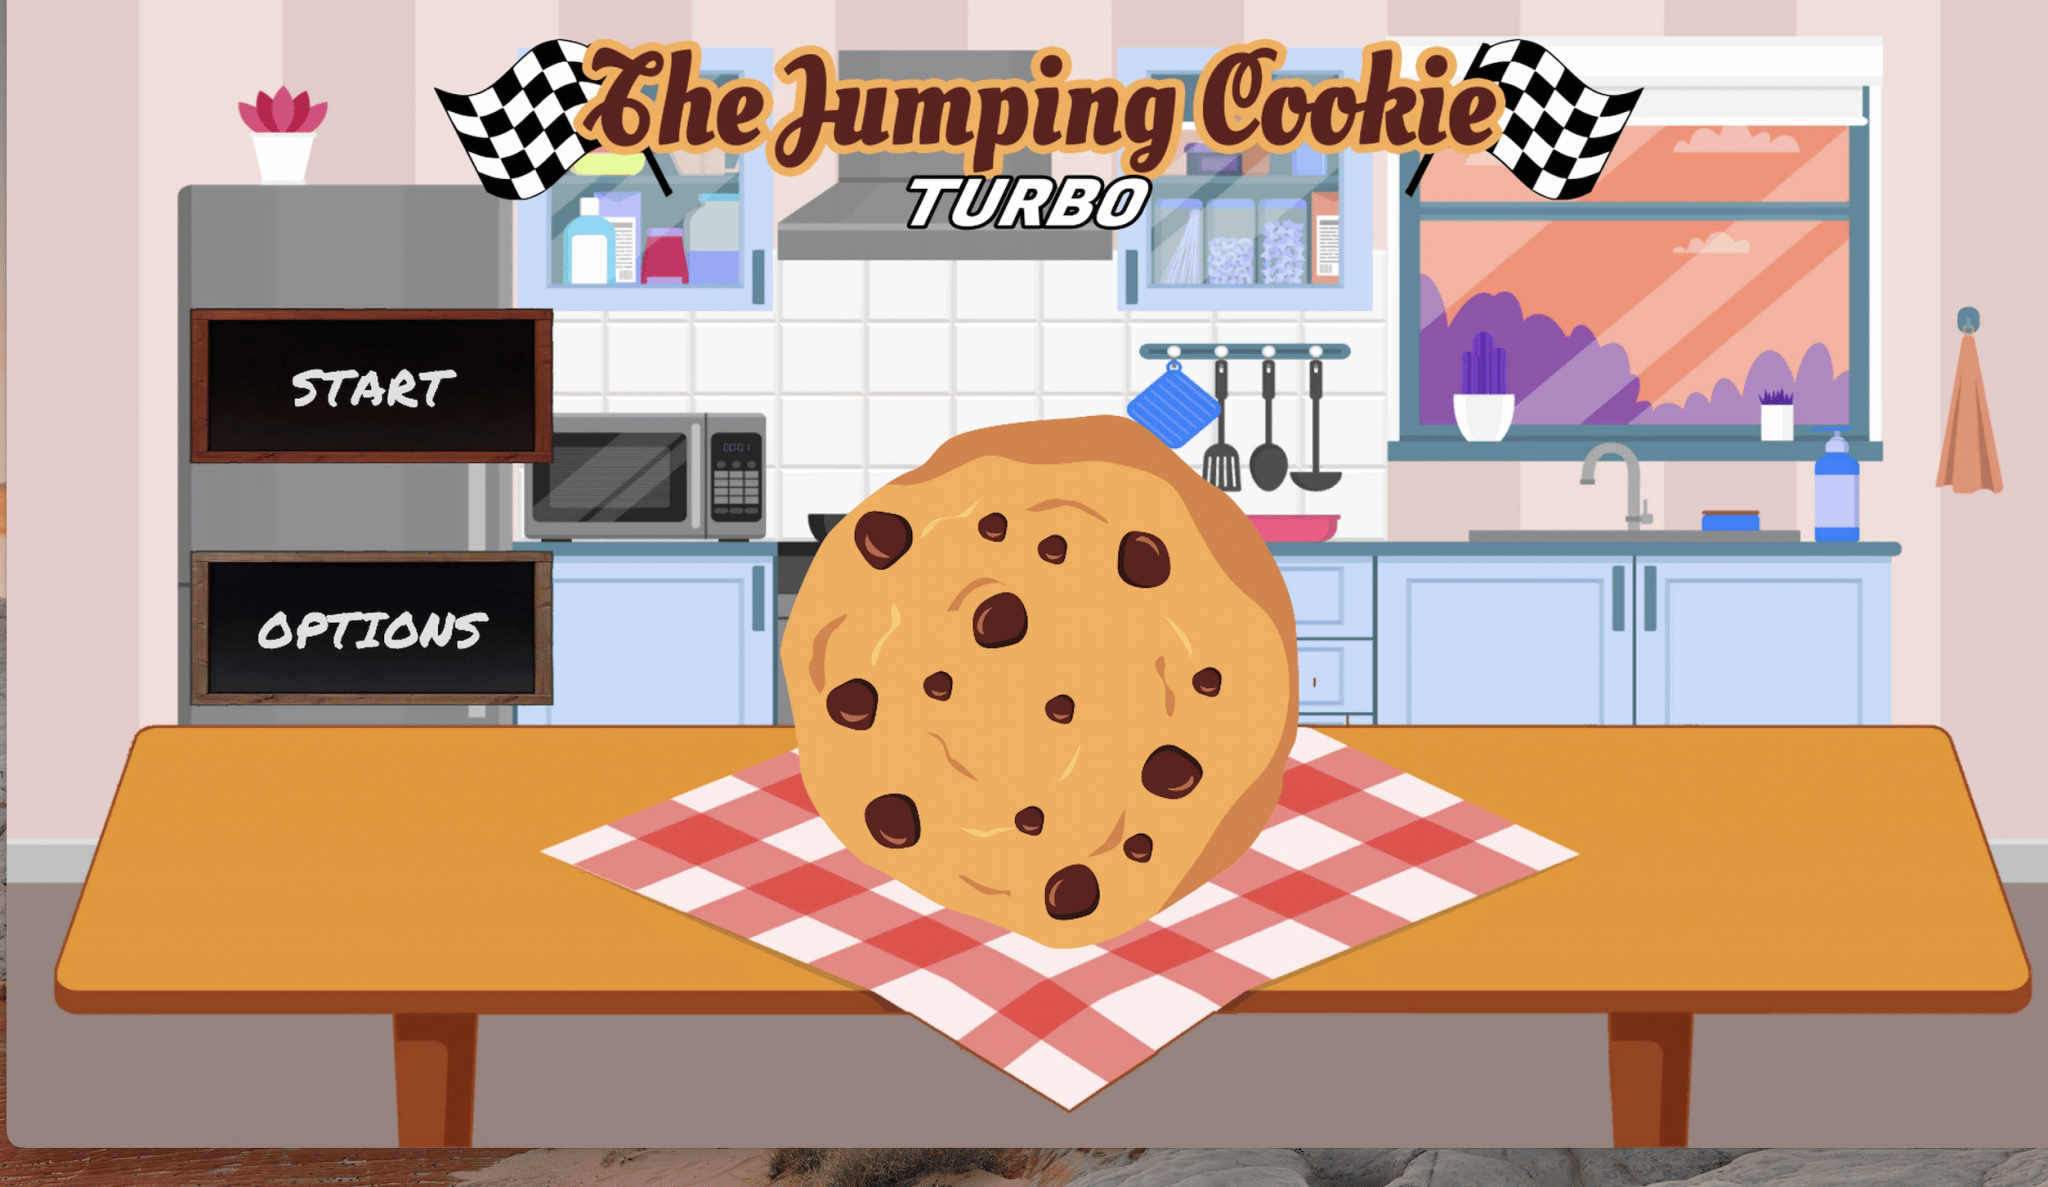 The Jumping Cookie turbo